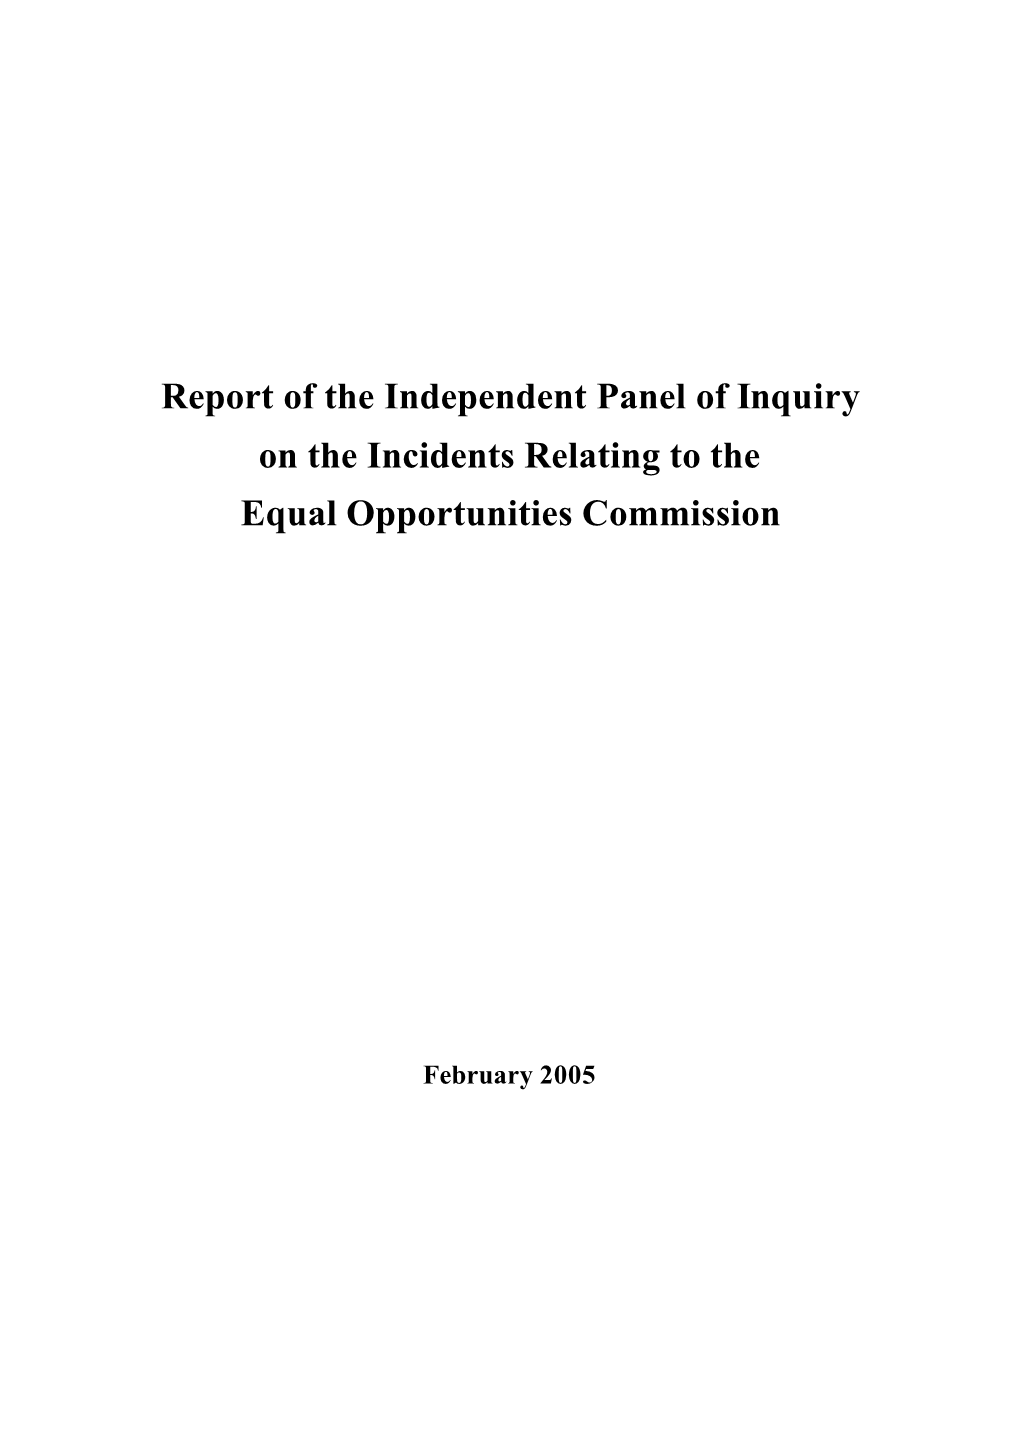 Report of the Independent Panel of Inquiry on the Incidents Relating to the Equal Opportunities Commission